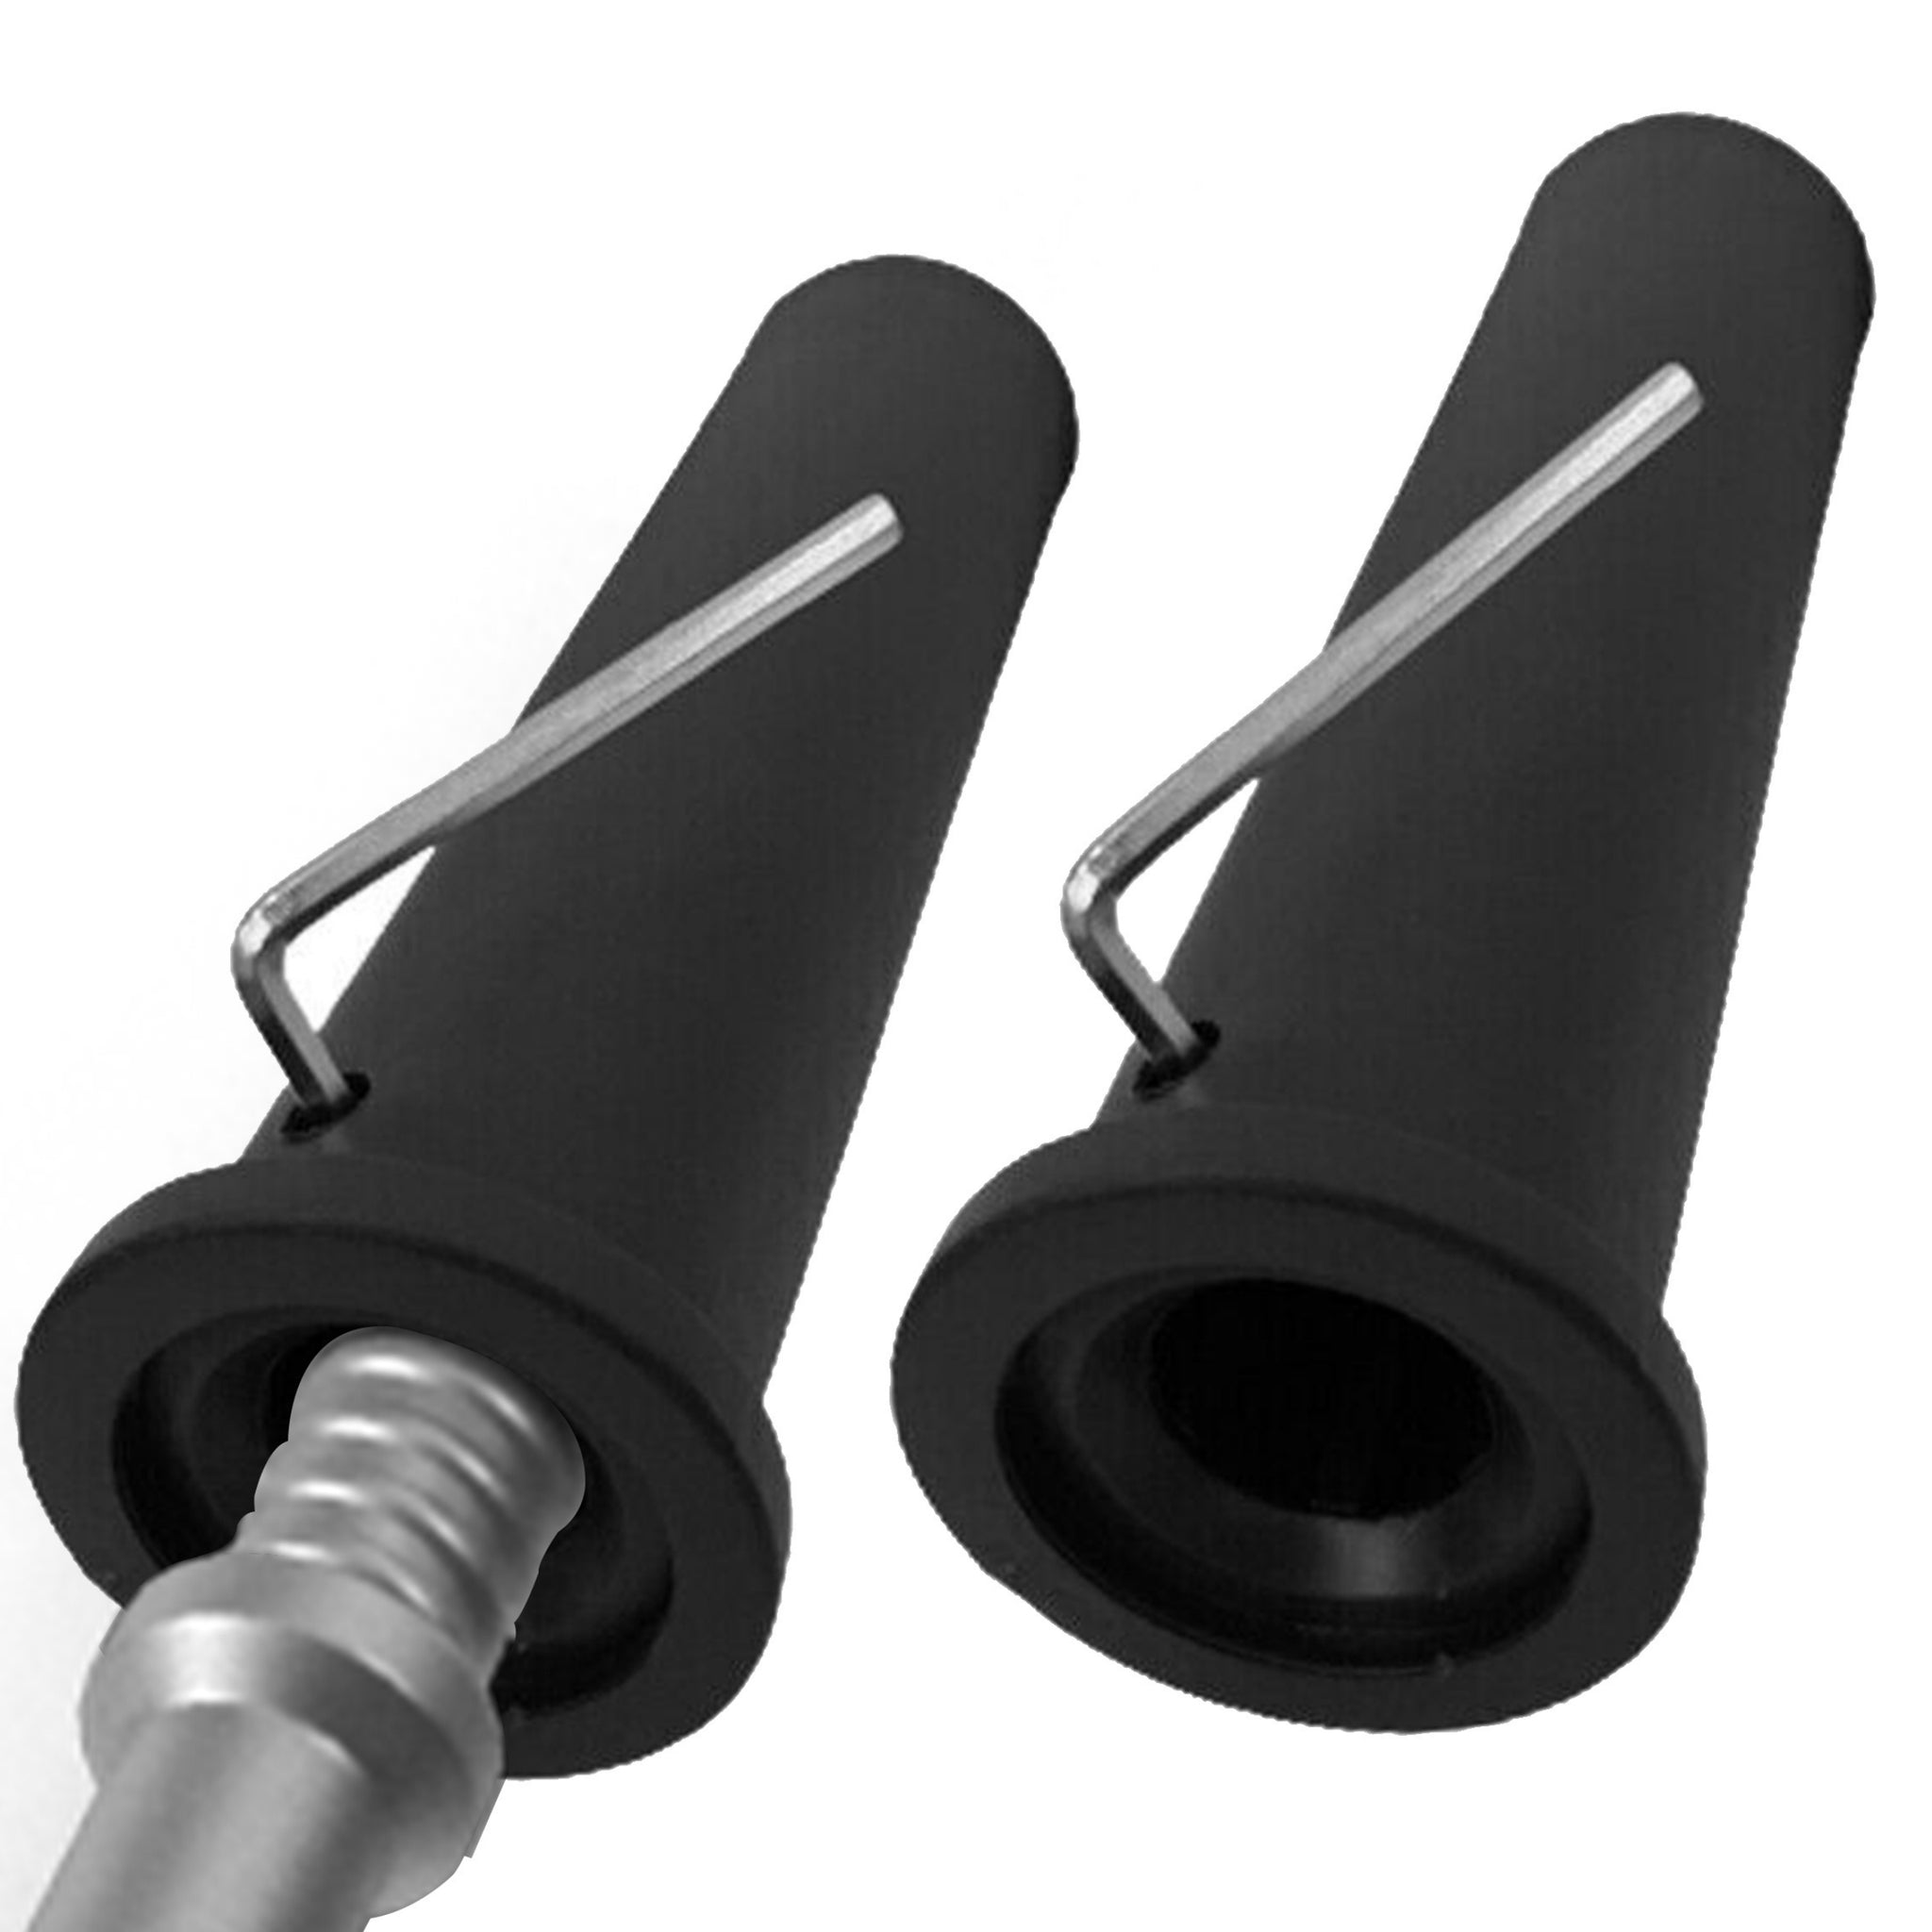 Standard Bar to Olympic Bar Converters (1" to 2" / 25mm to 50mm)